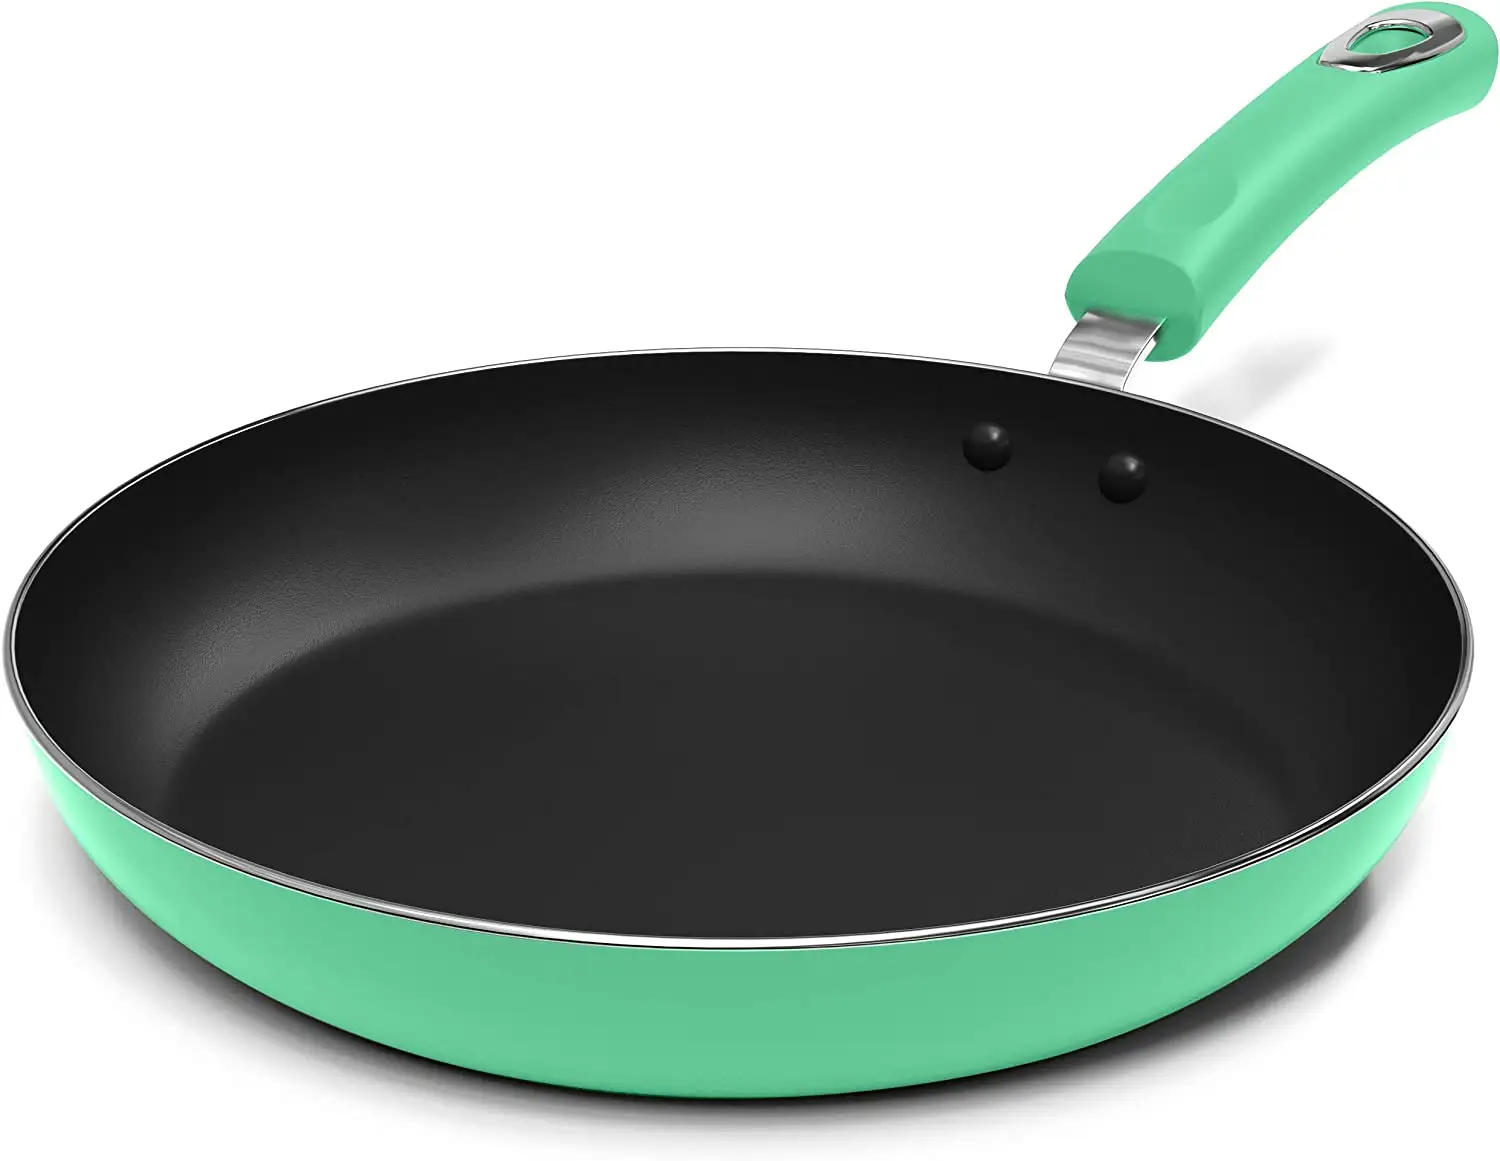 Full Size Fry pan Aluminum Pan Induction Non-Stick Fry Non Stick Egg Omelet Steak Kitchen Handle Nonstick Frying Pan